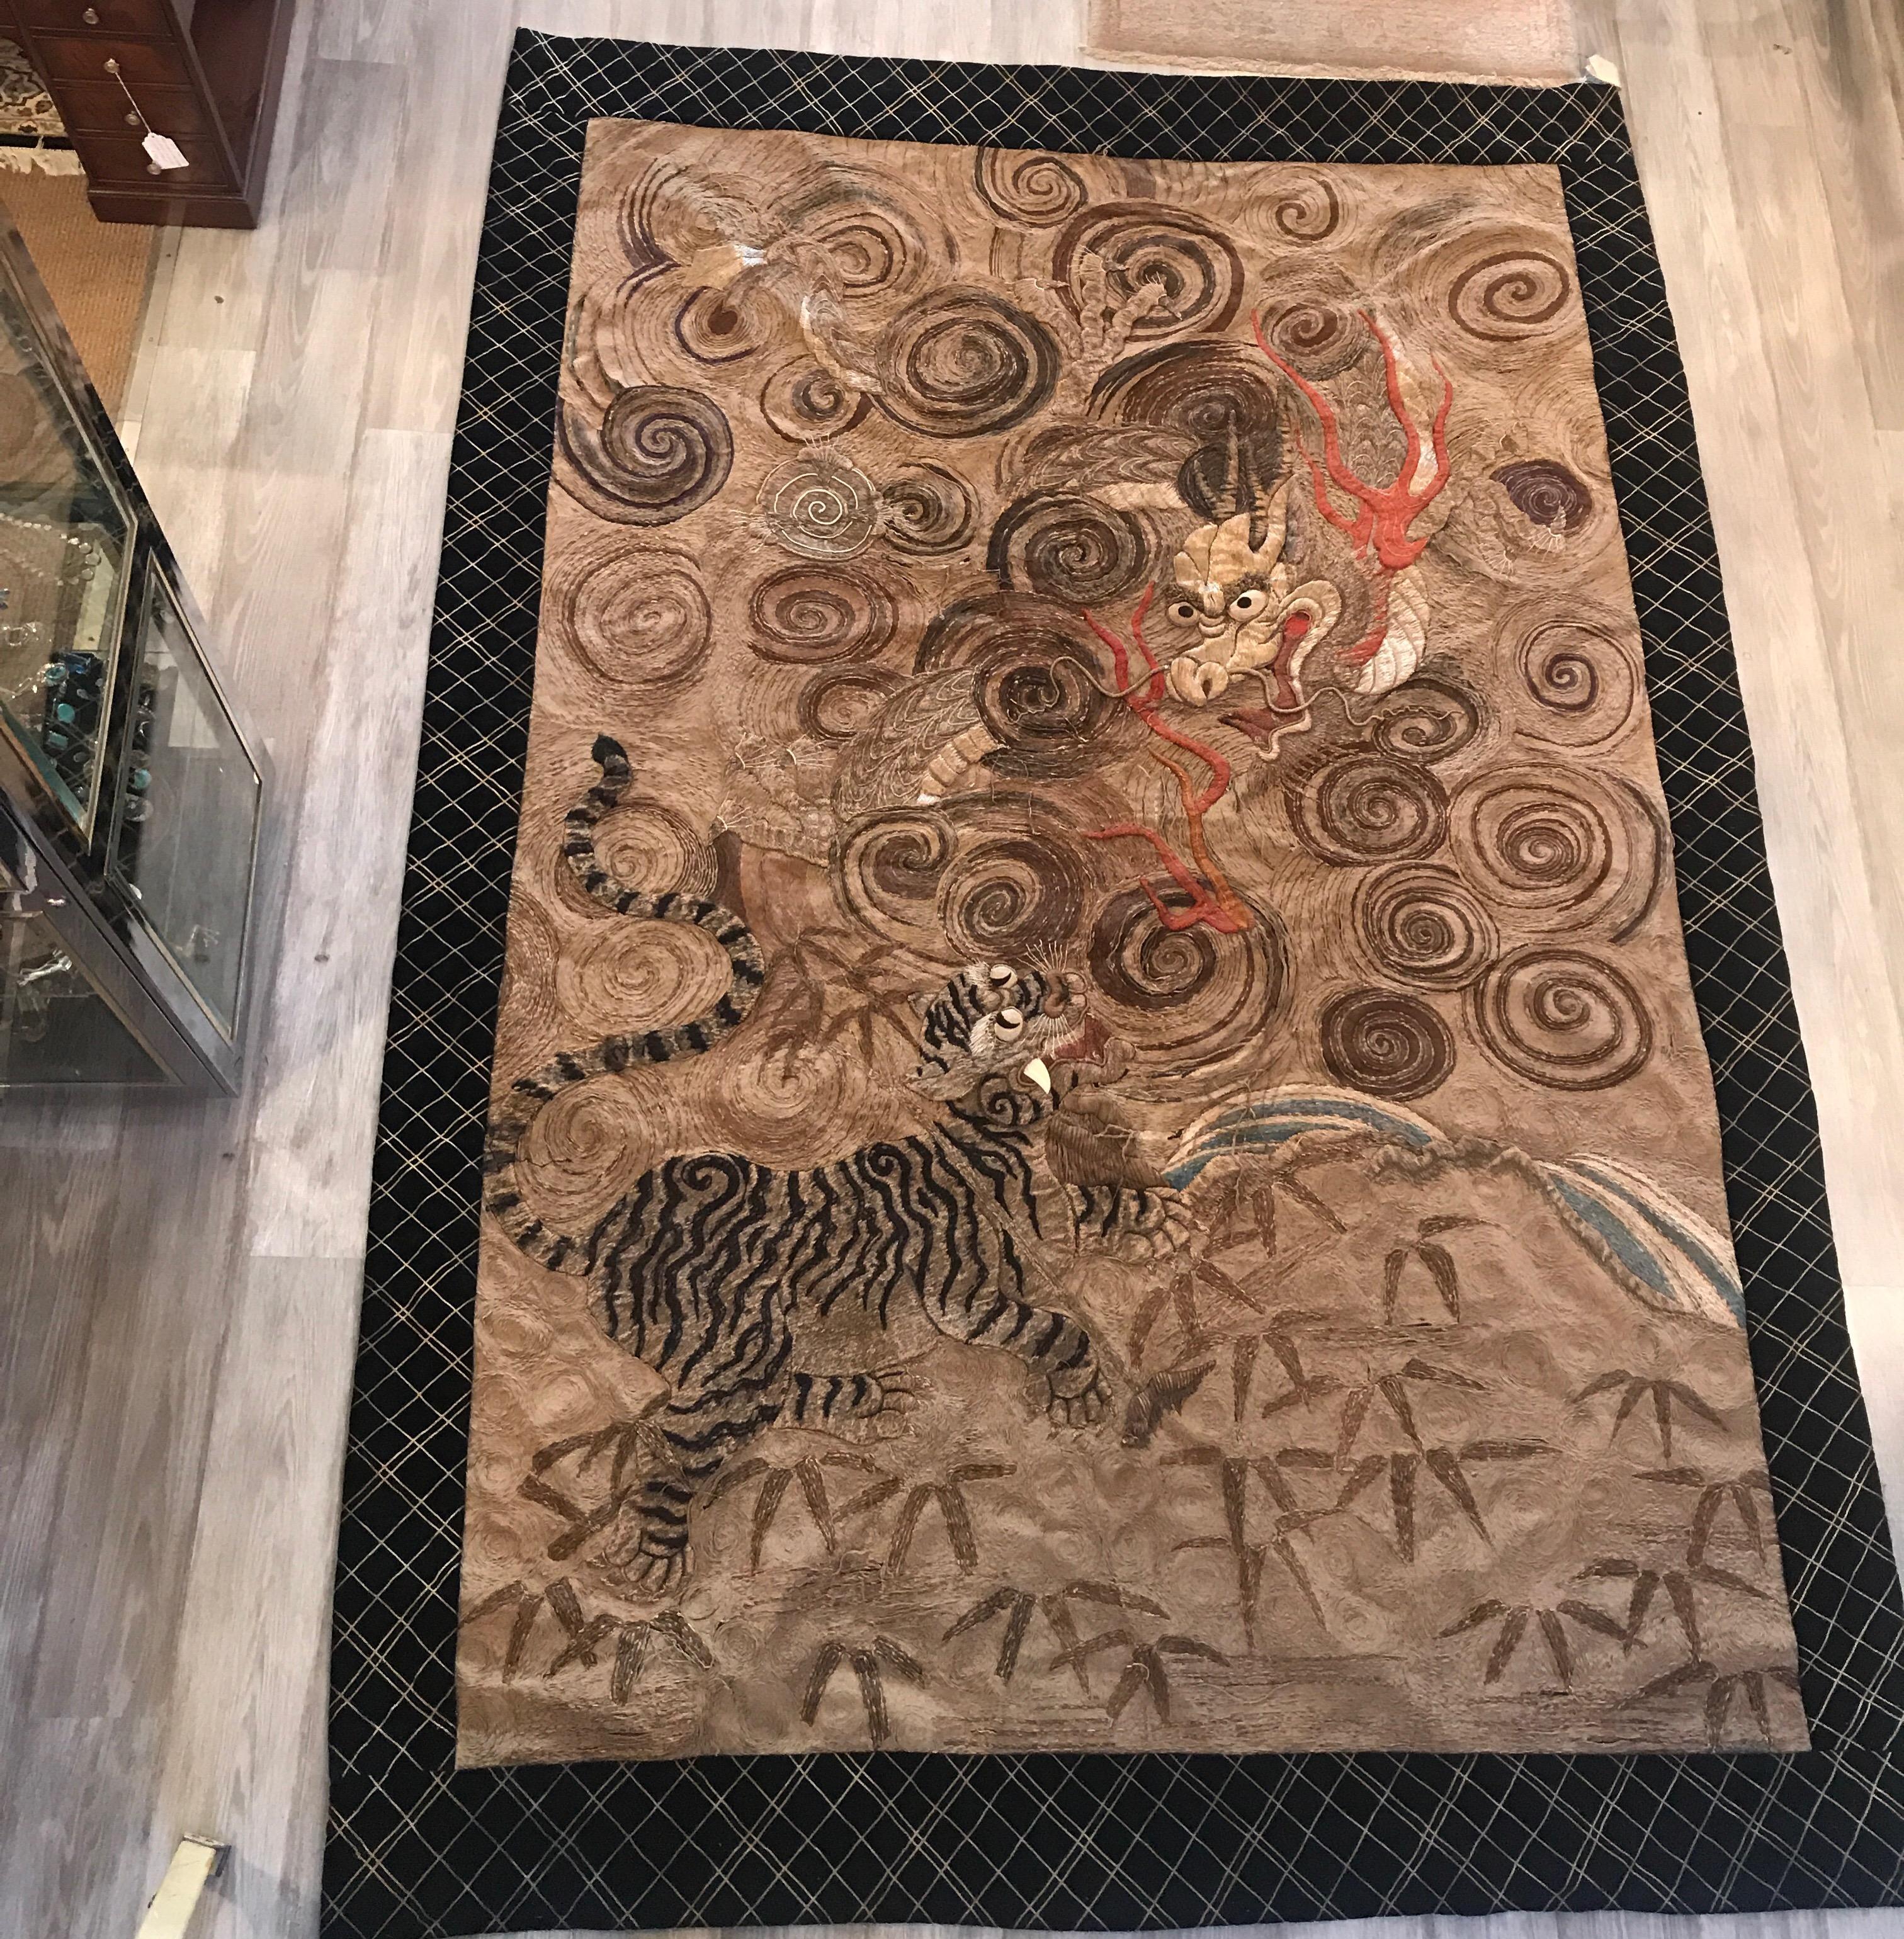 An impressive handmade Japanese needlework tapestry with velvet border. The intricate tapestry with dragon and tiger with the background totally filled with handstitched and embroidered pattern. The edge with a later velvet border, Meiji period,